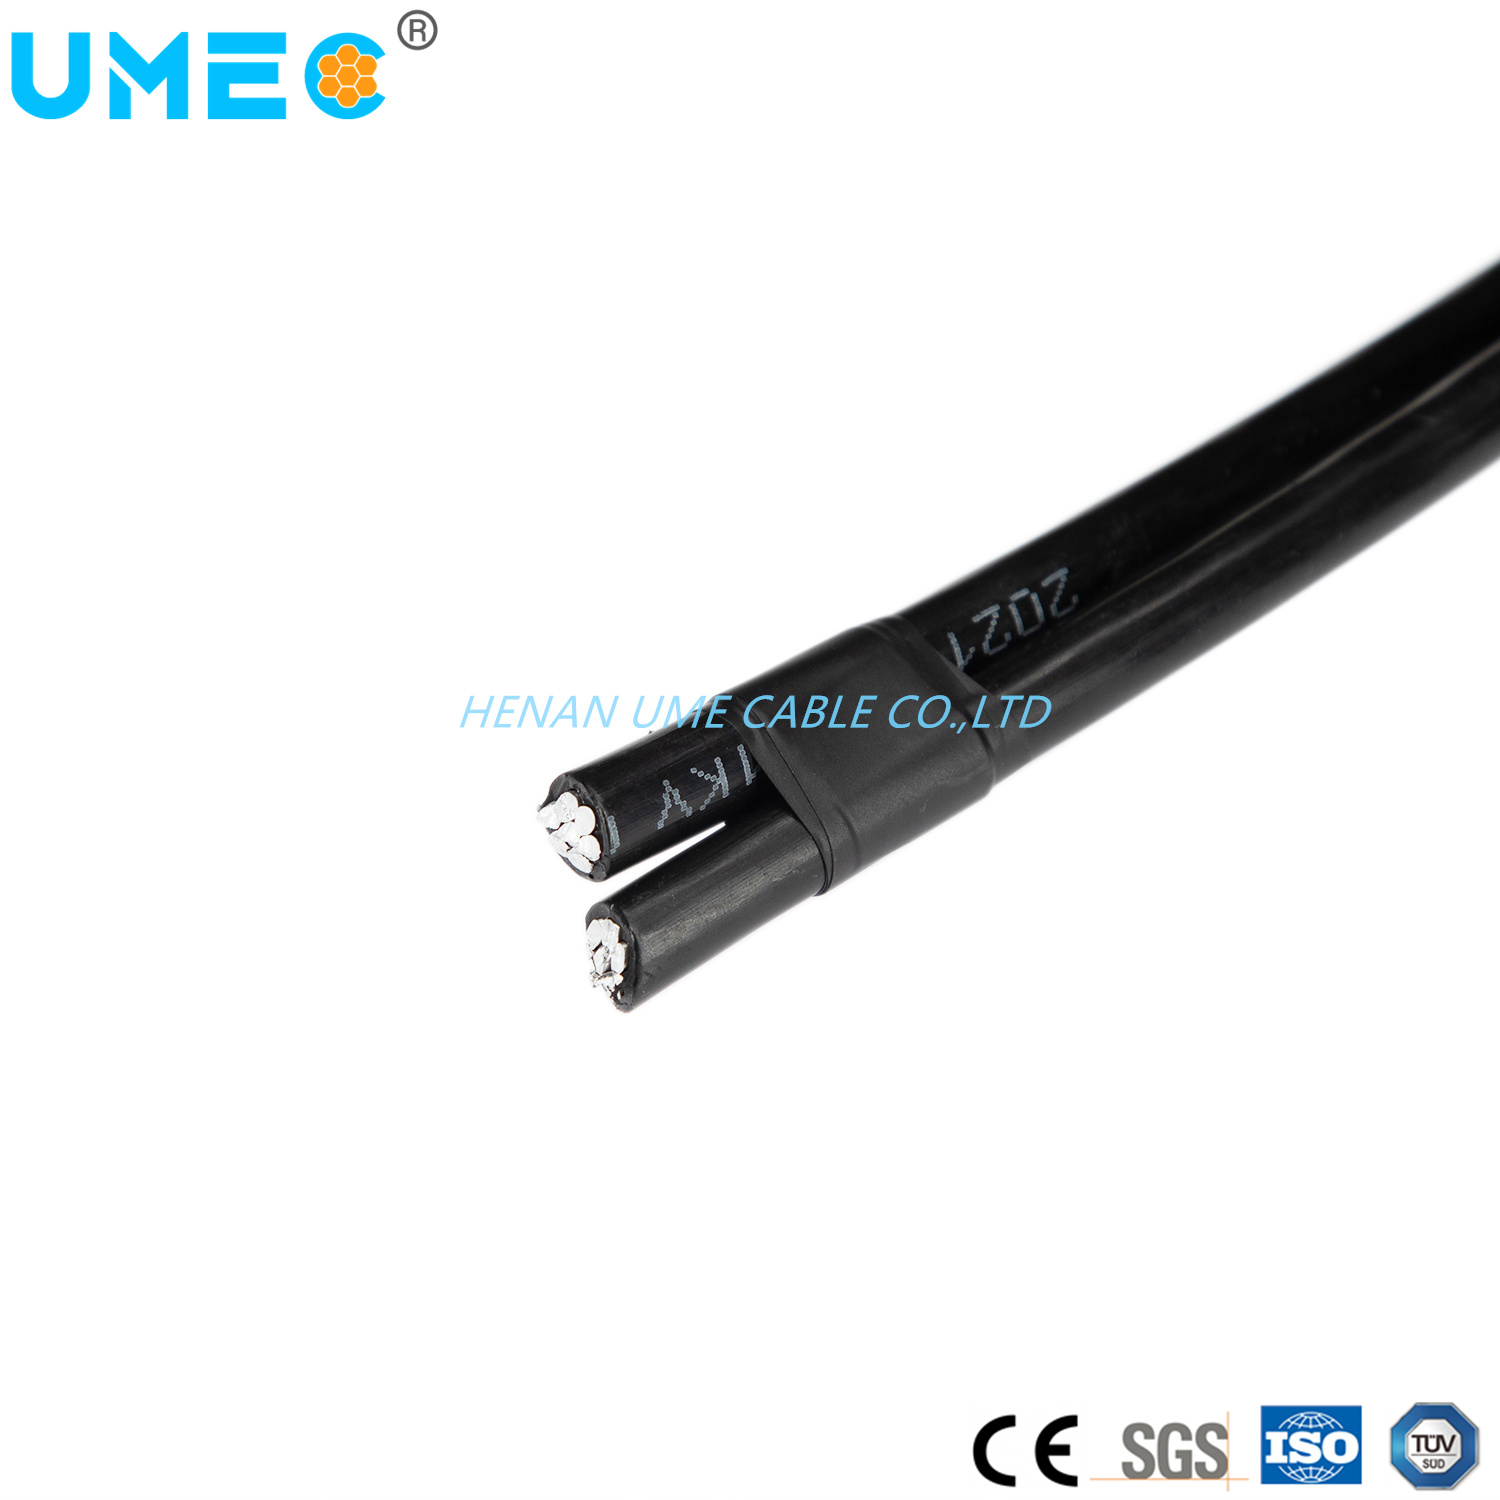 Duplex Ud Cable Underground Distribution Cable